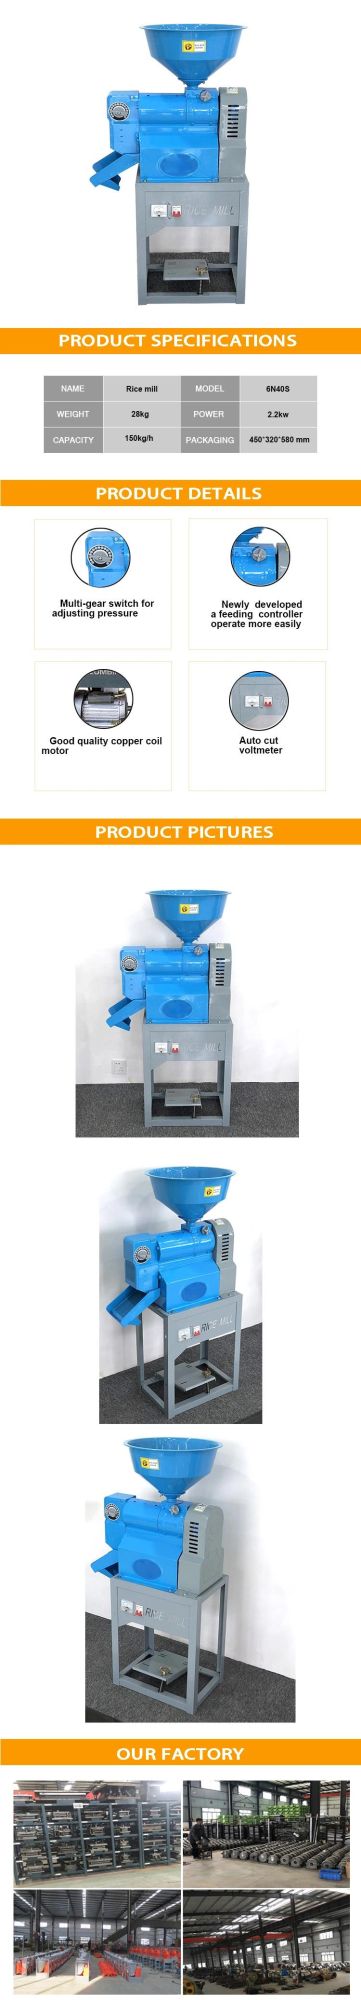 Irony Small Rice Mill Machine for Home/ Commercial Use